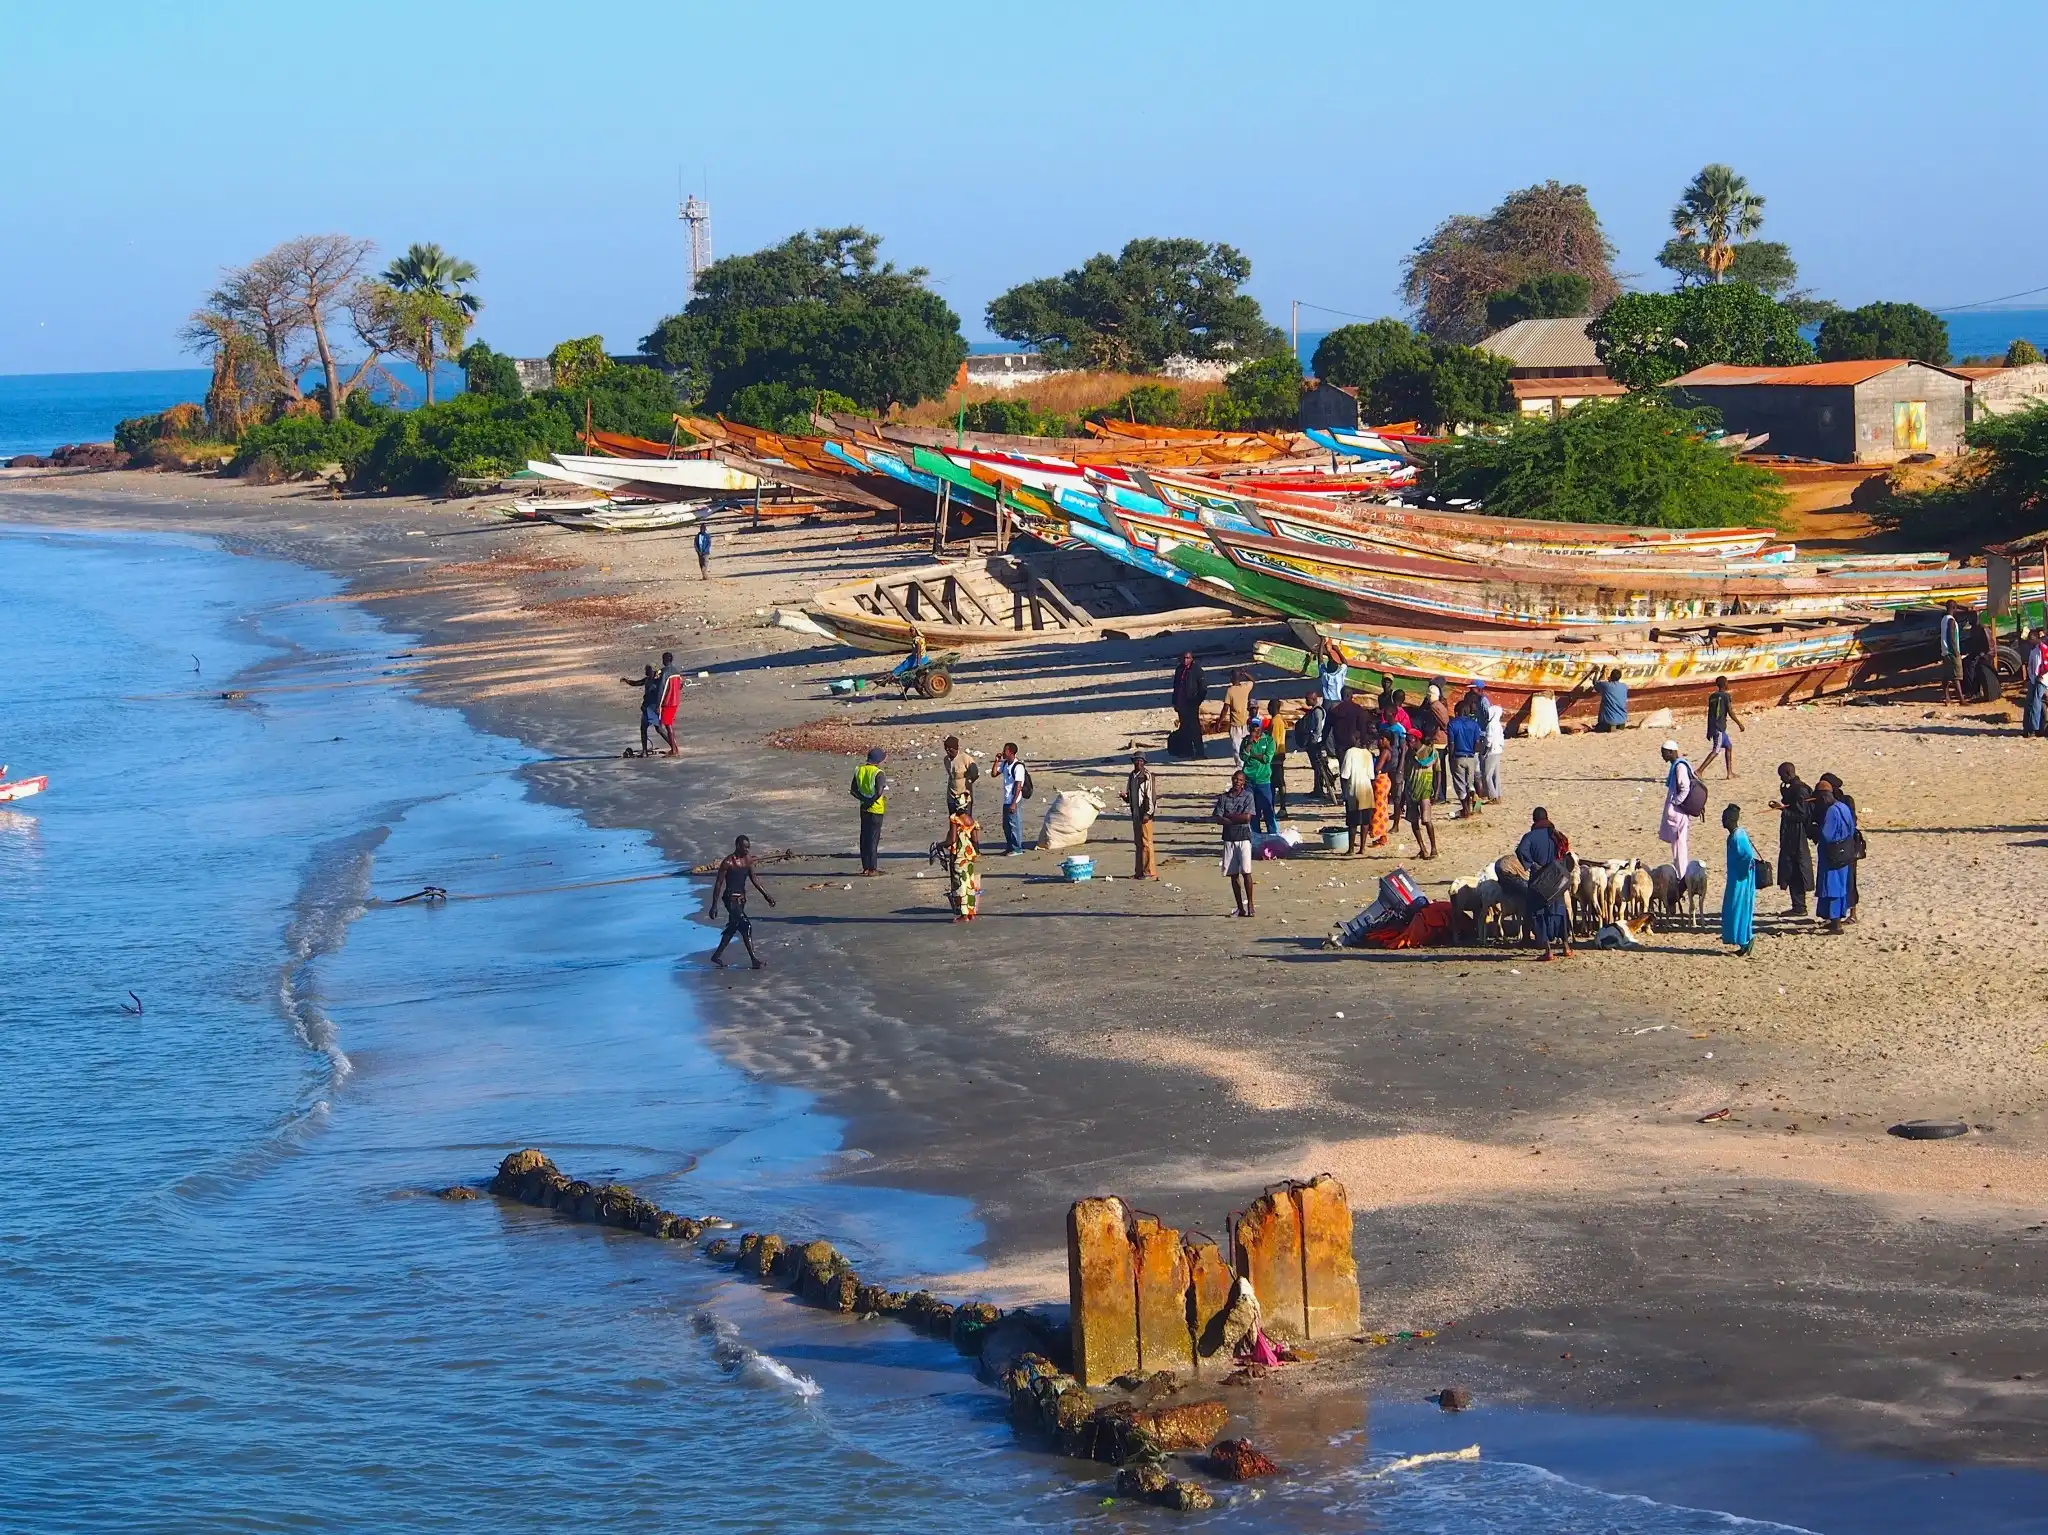 The Gambia tourism